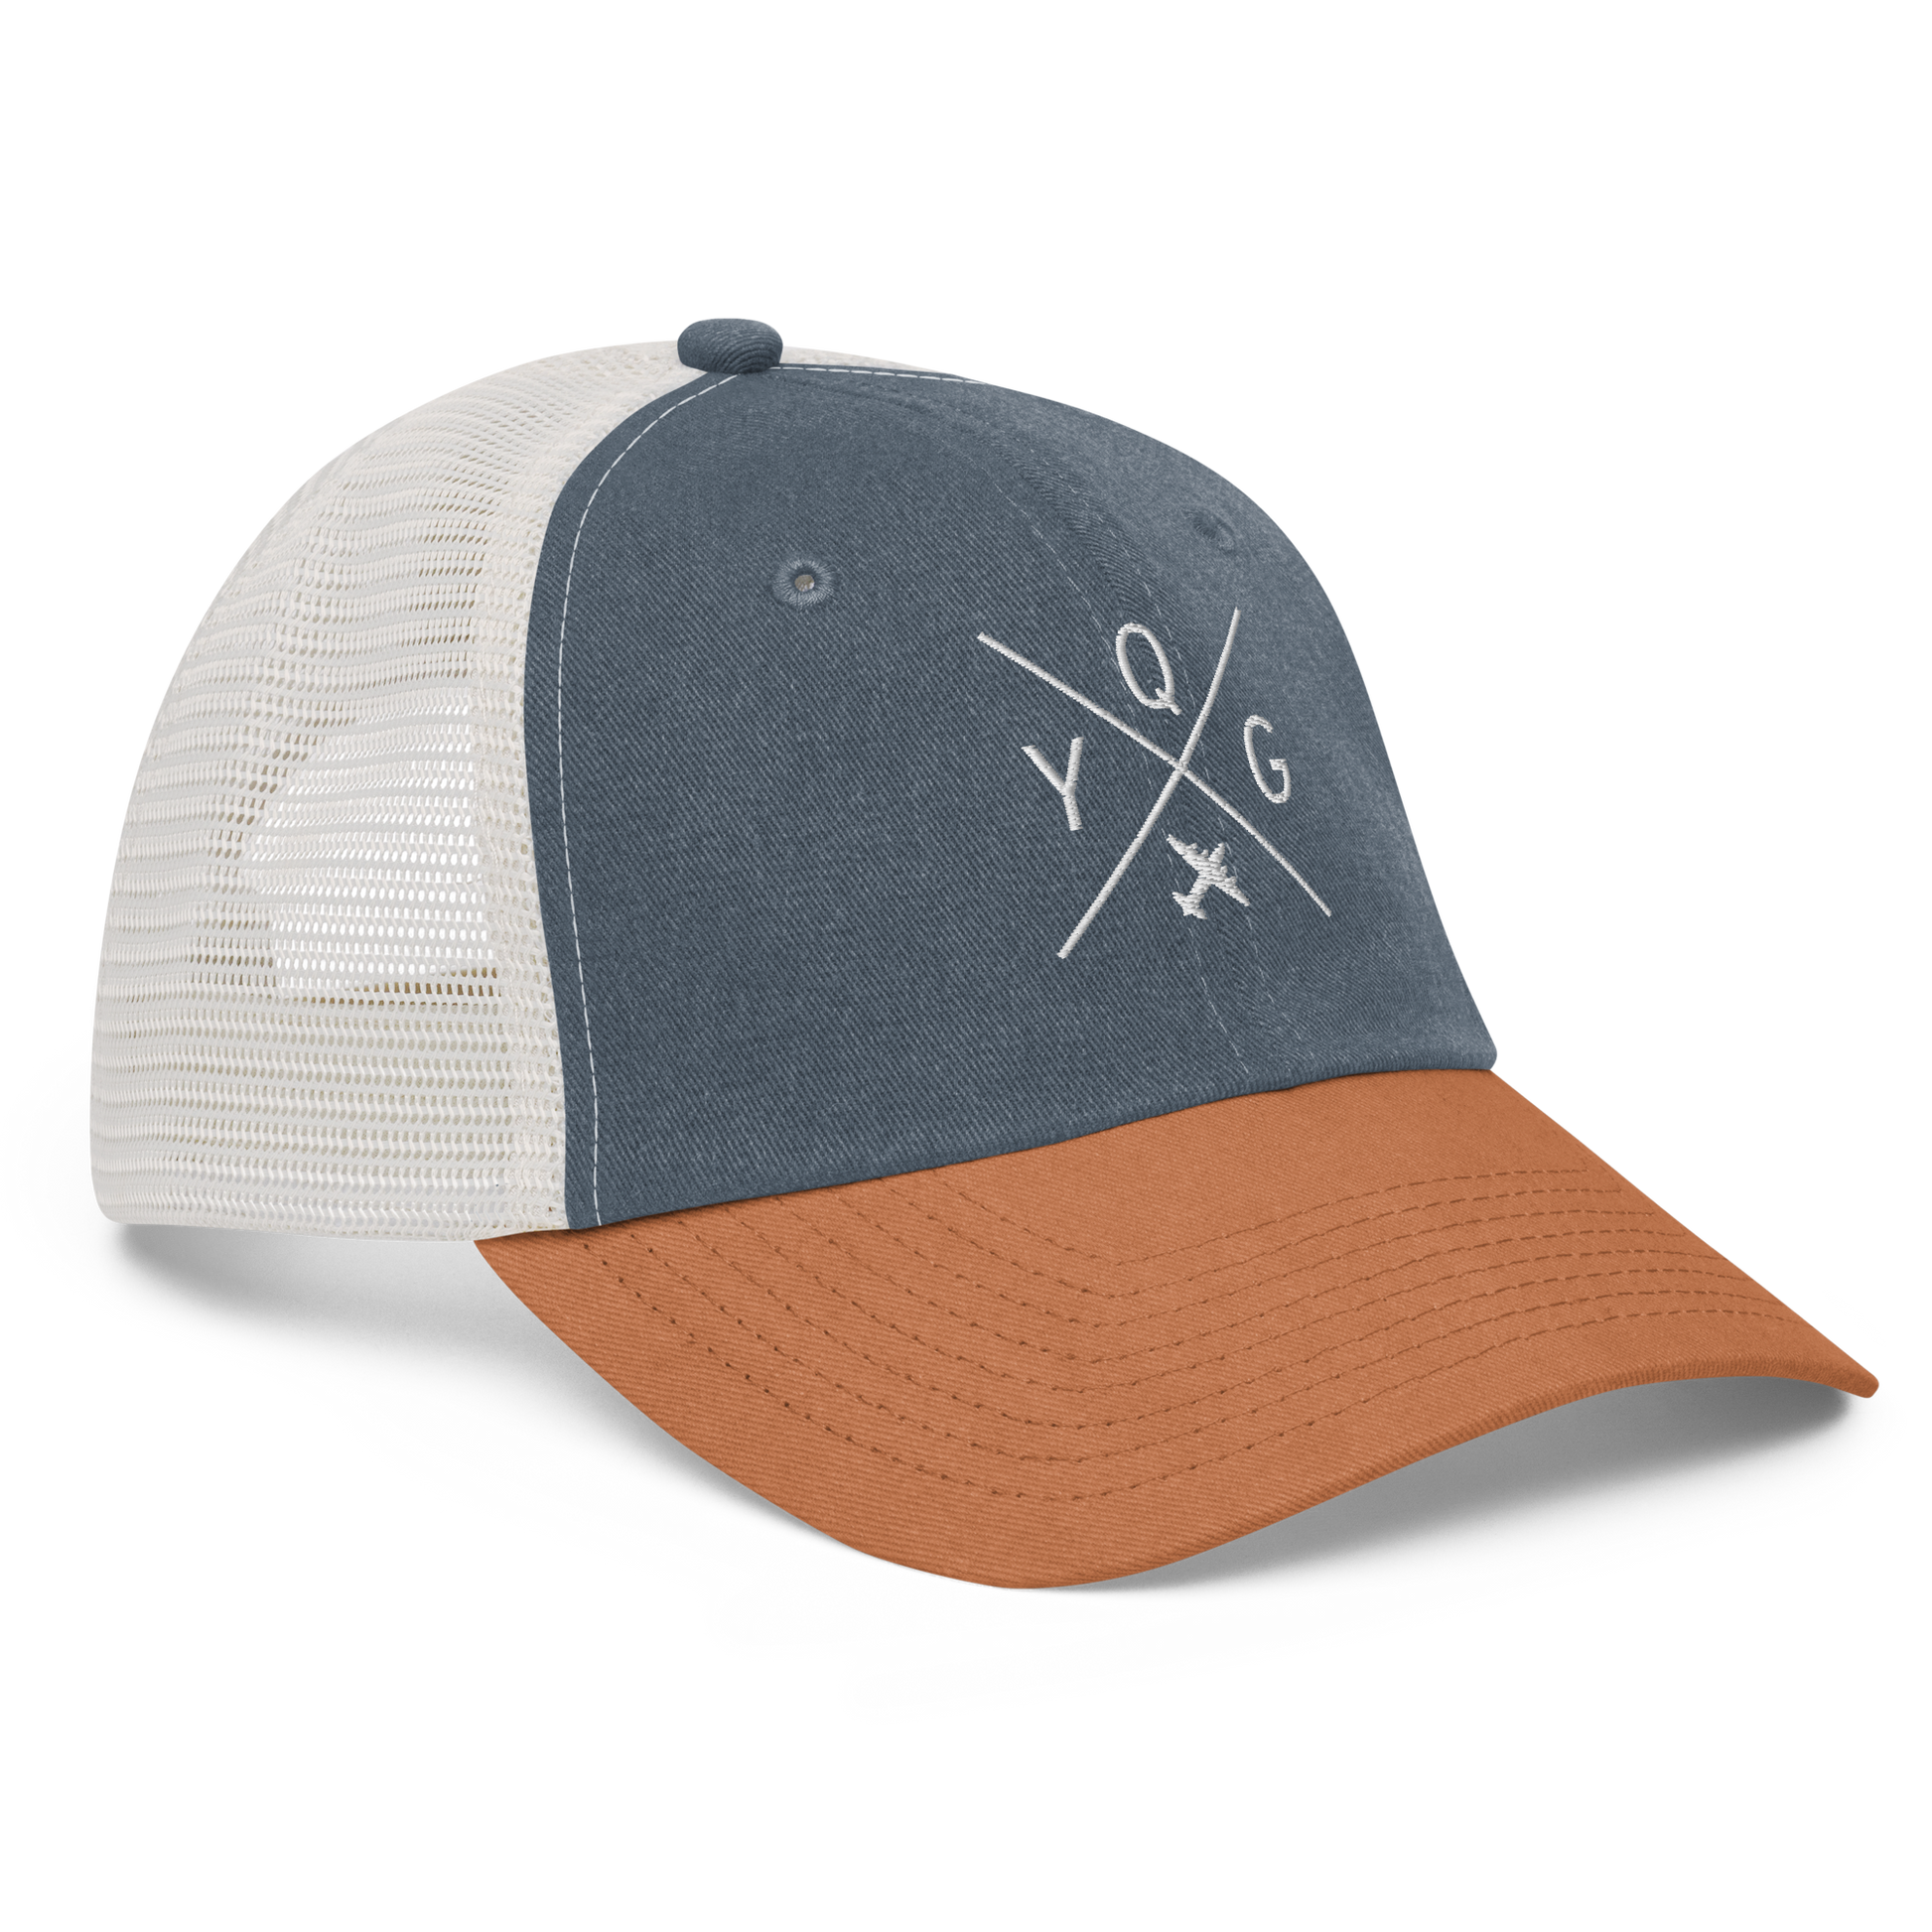 YHM Designs - YQG Windsor Pigment-Dyed Trucker Cap - Crossed-X Design with Airport Code and Vintage Propliner - White Embroidery - Image 16